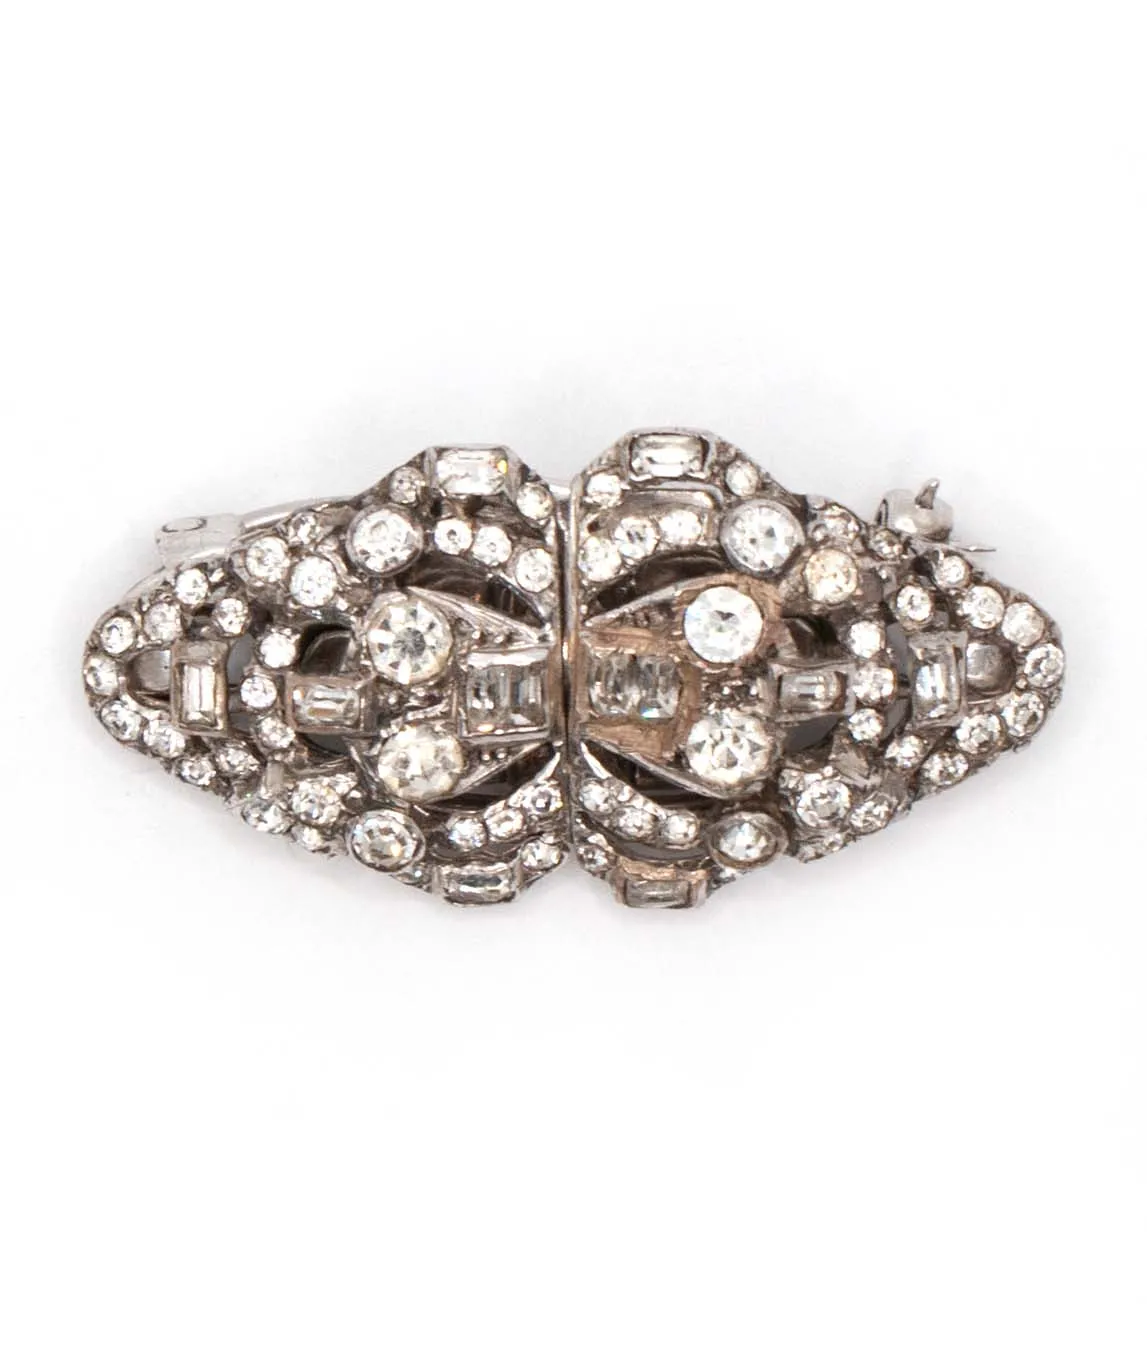 Double dress clip brooch with clear crystals